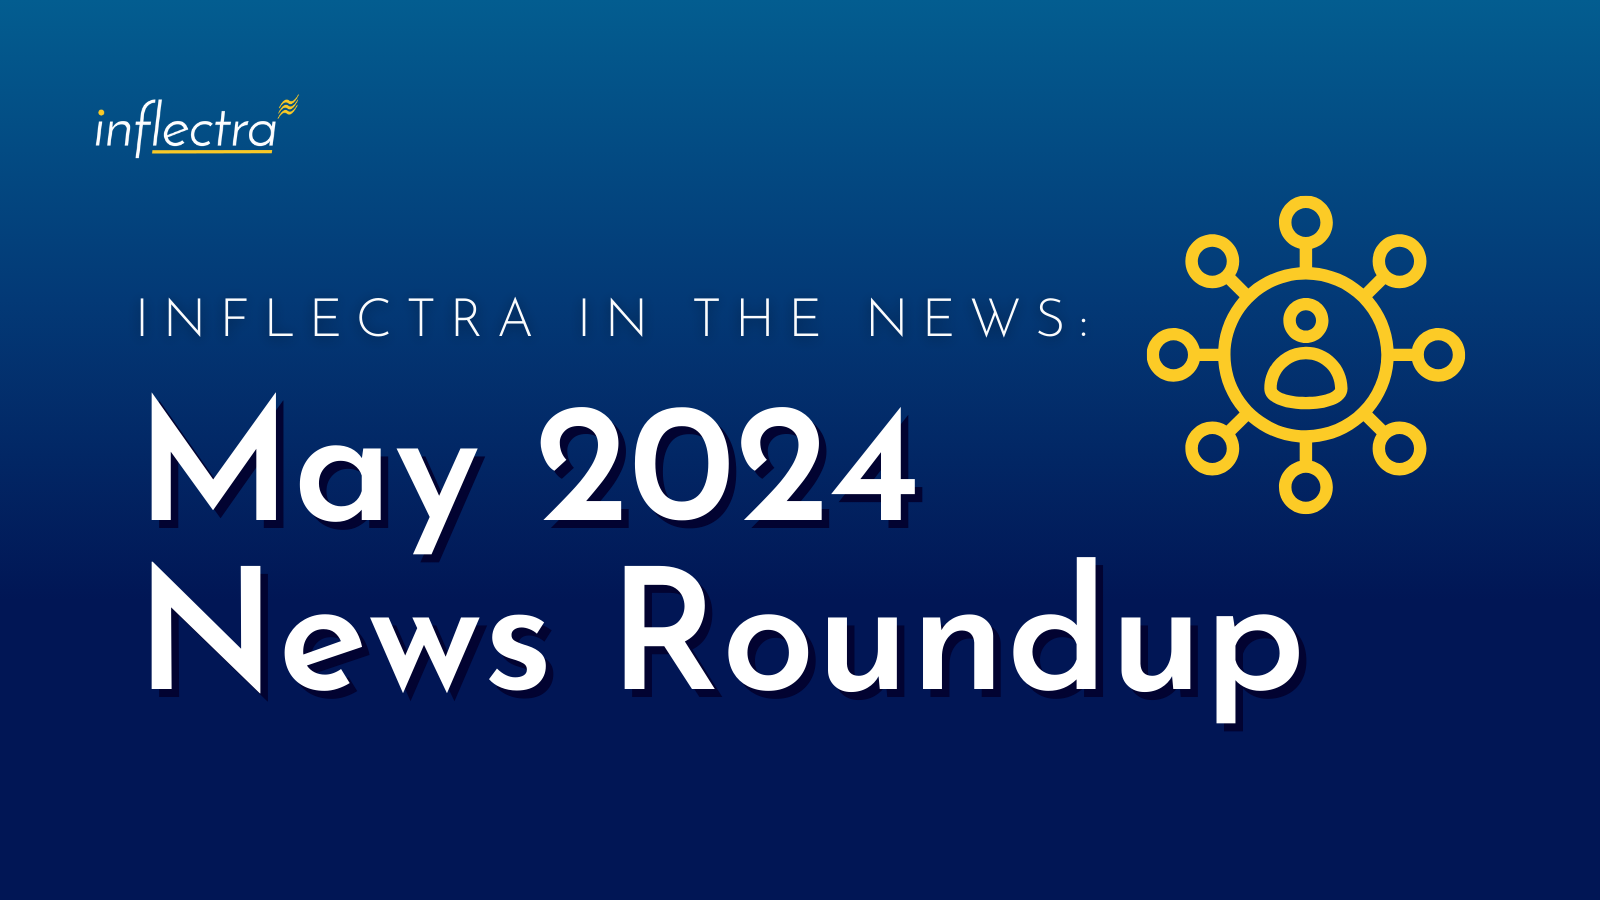 "Inflectra in the News: May 2024 News Roundup" on a dark blue background. The word "Inflectra" and an icon of a person surrounded by a network are in gold.